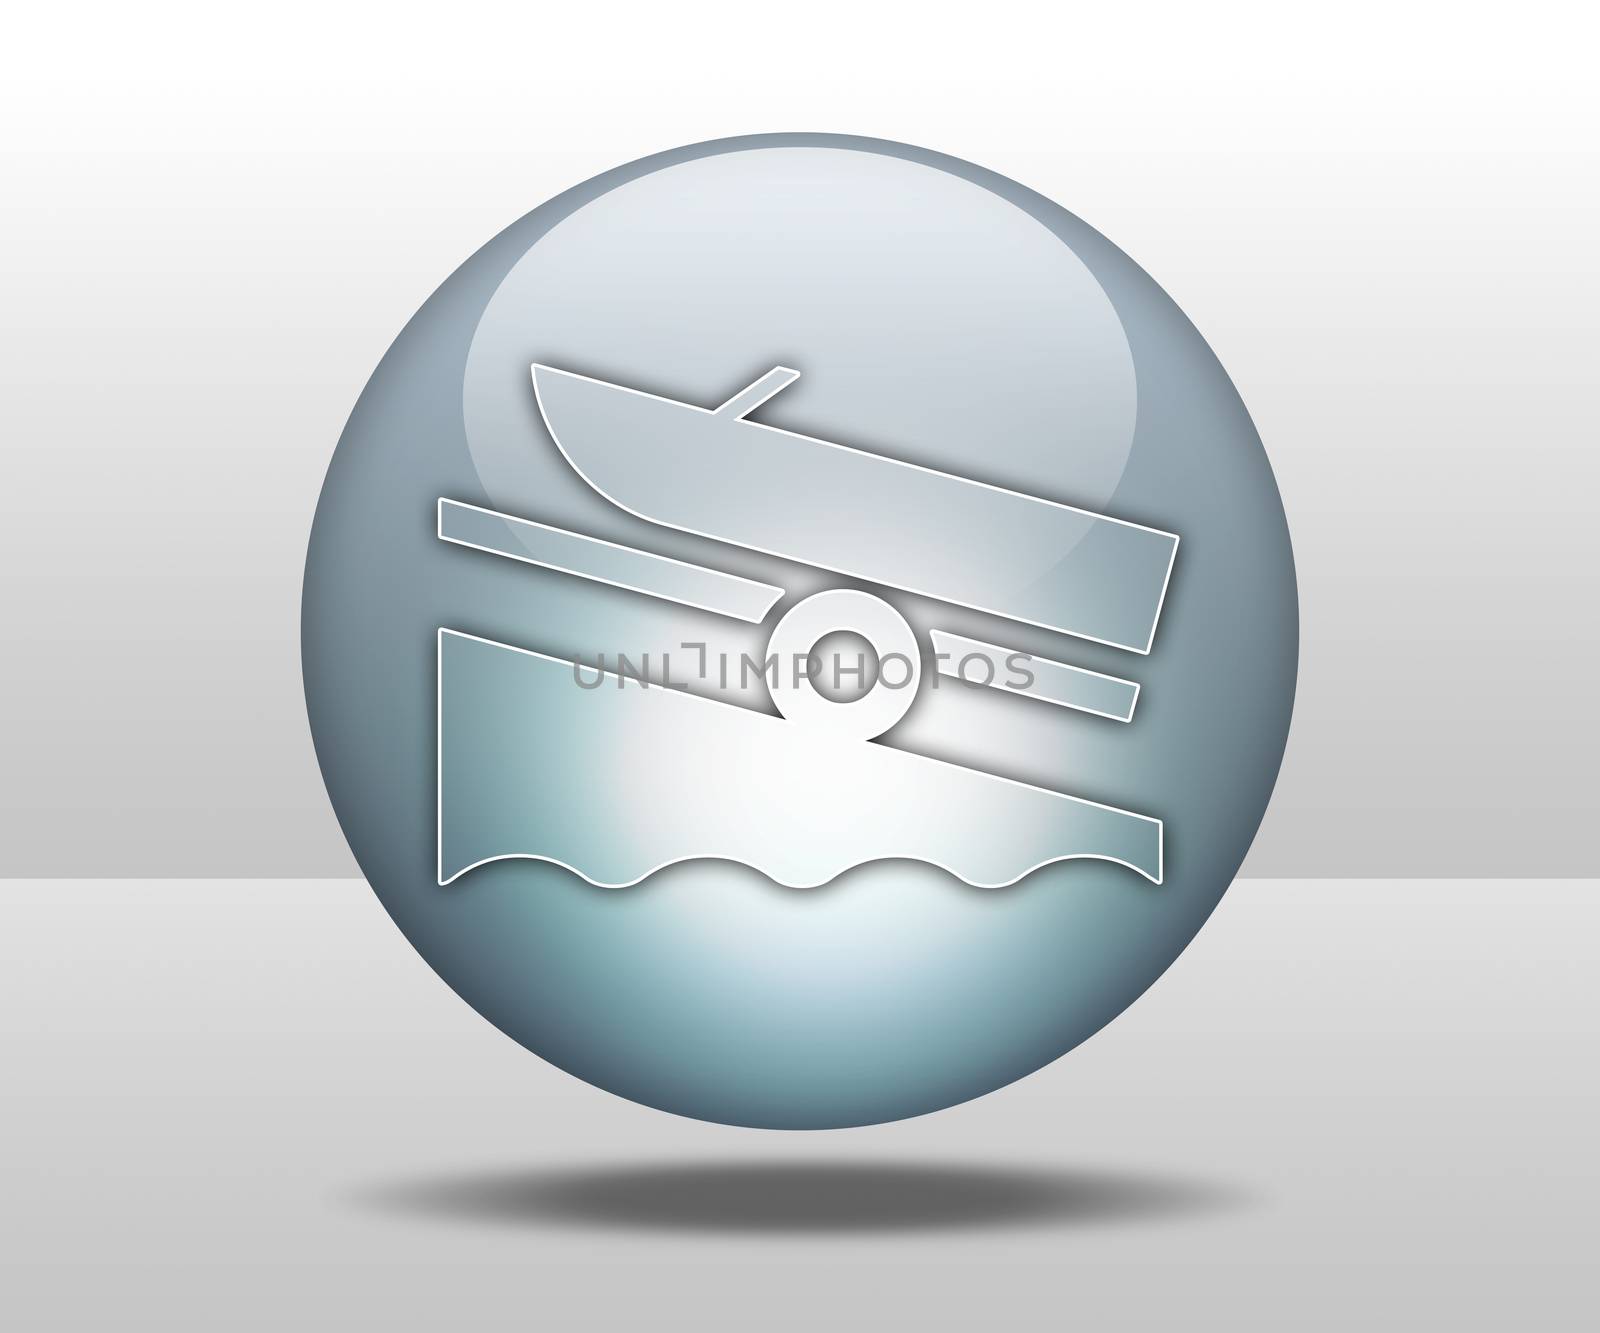 Icon, Button, Pictogram Boat Ramp by mindscanner